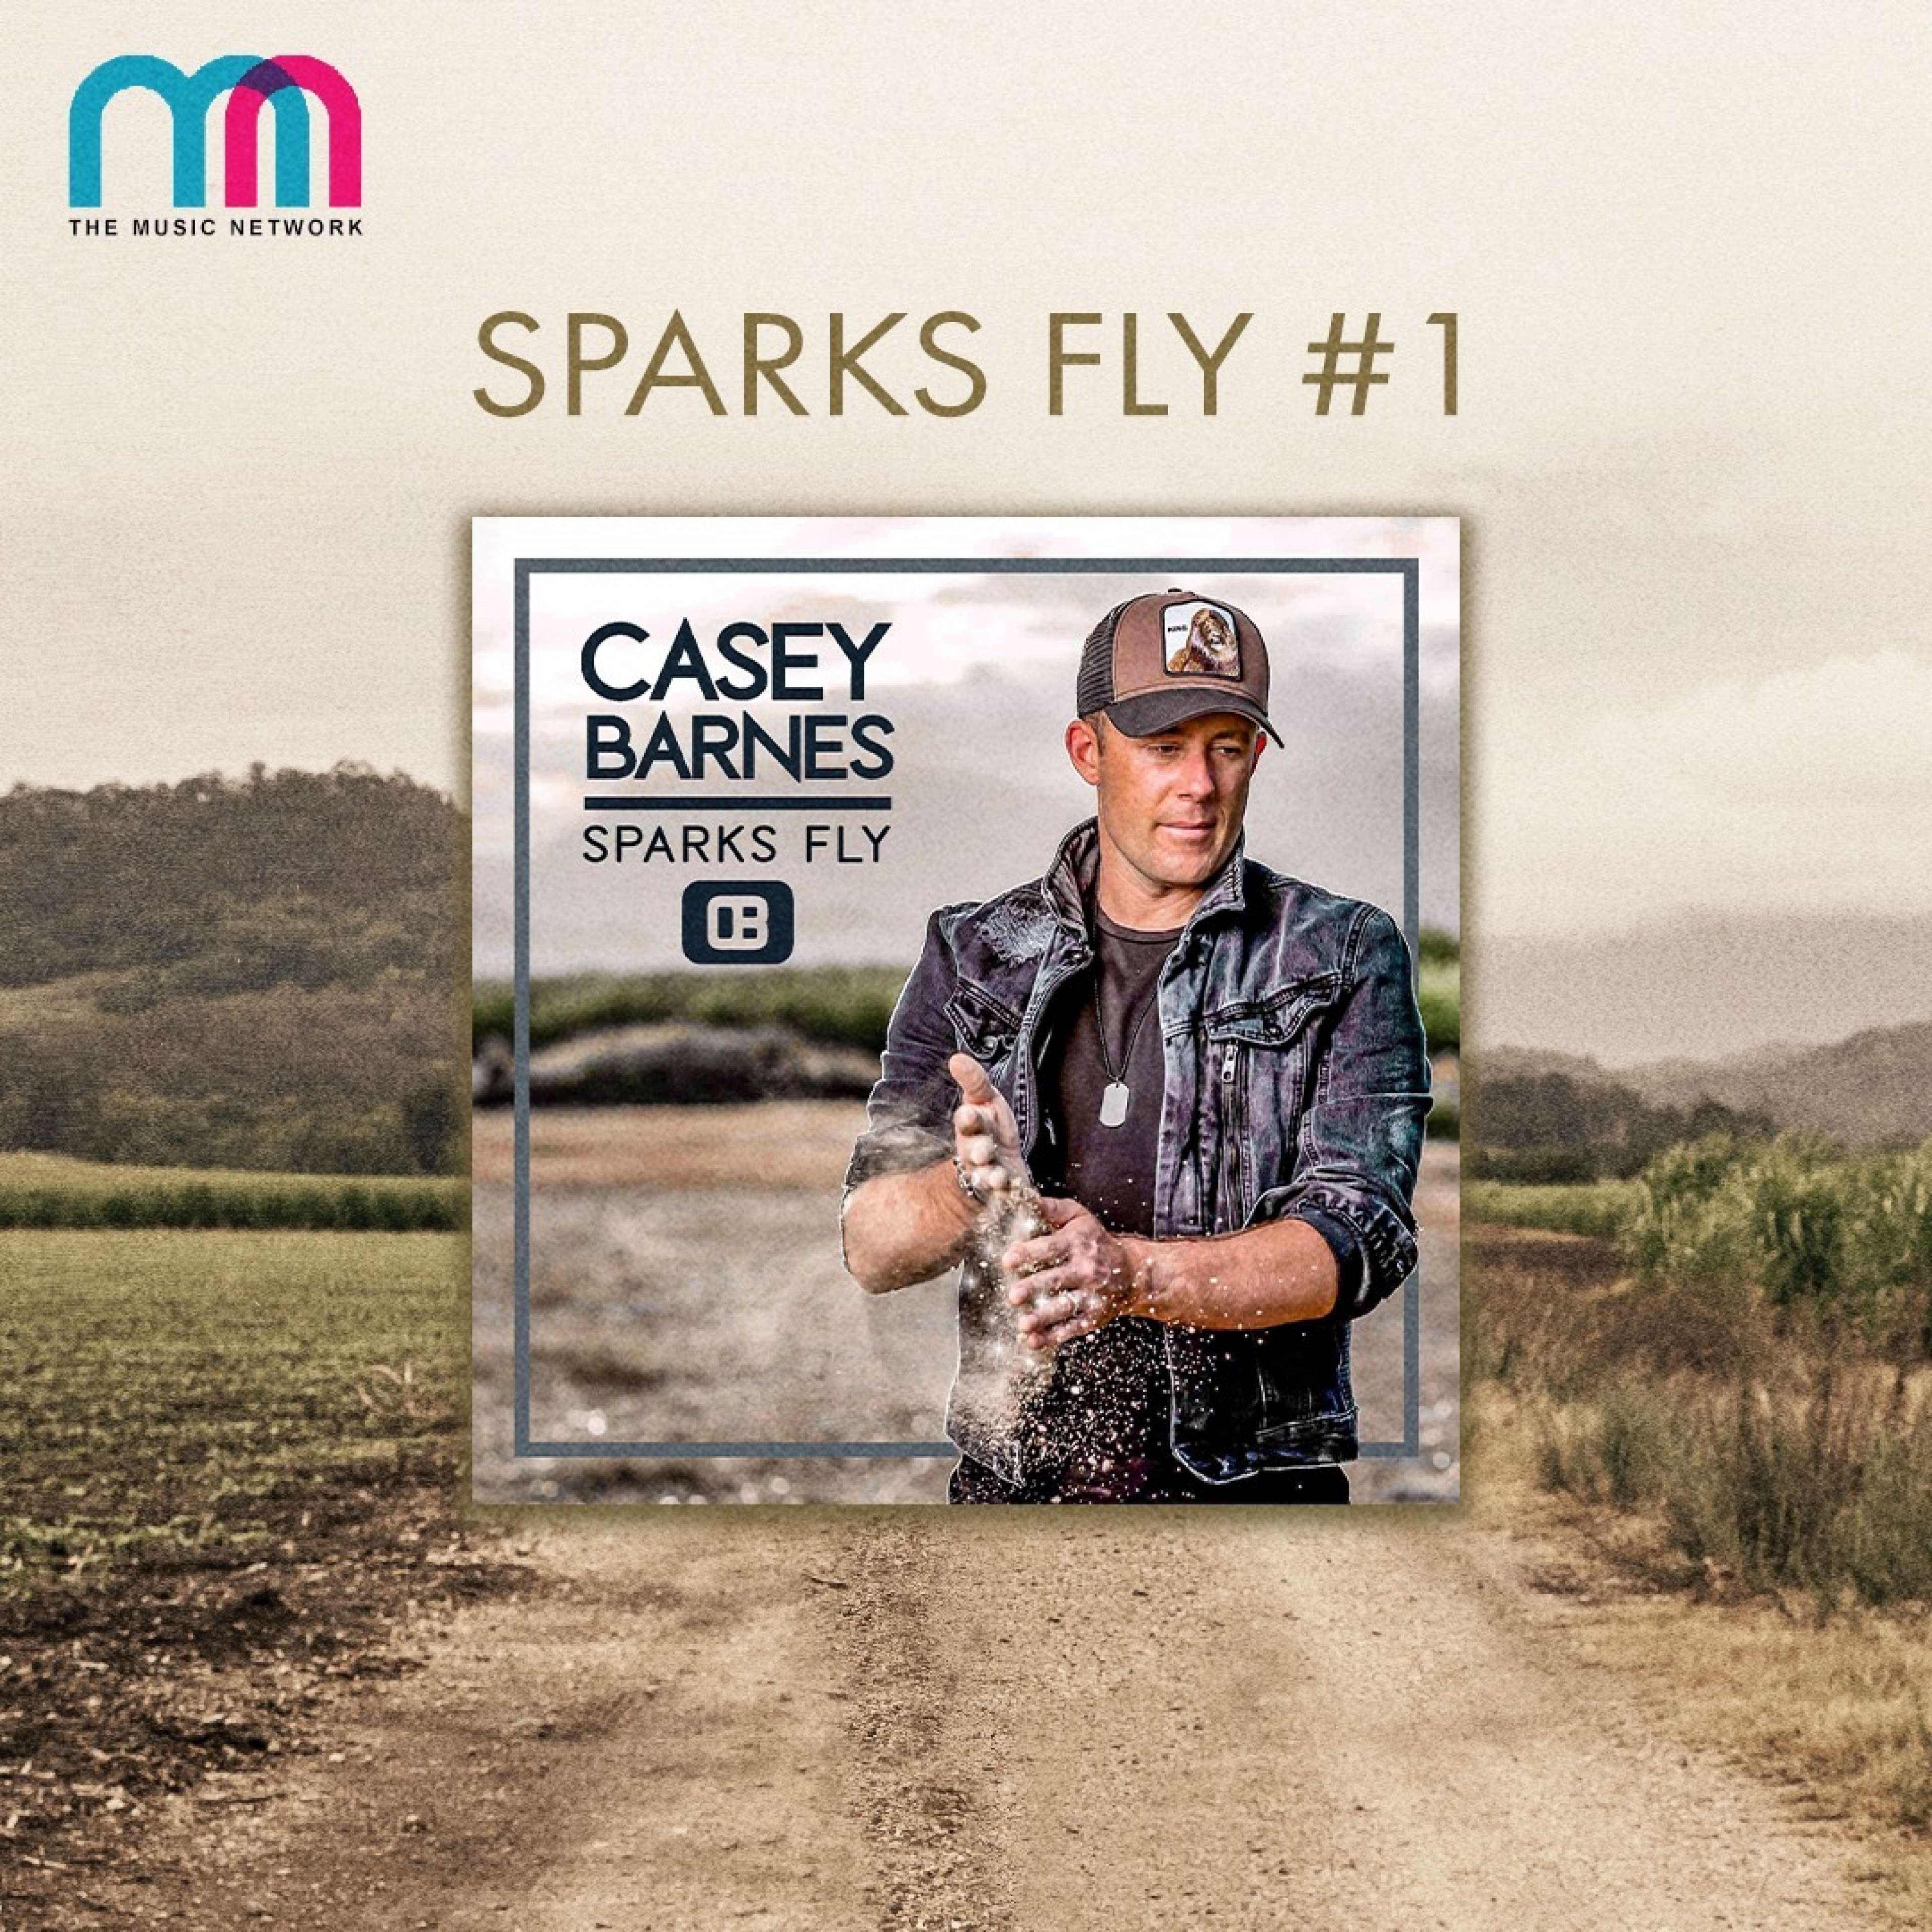 Casey Barnes #1 on National Country Airplay Chart